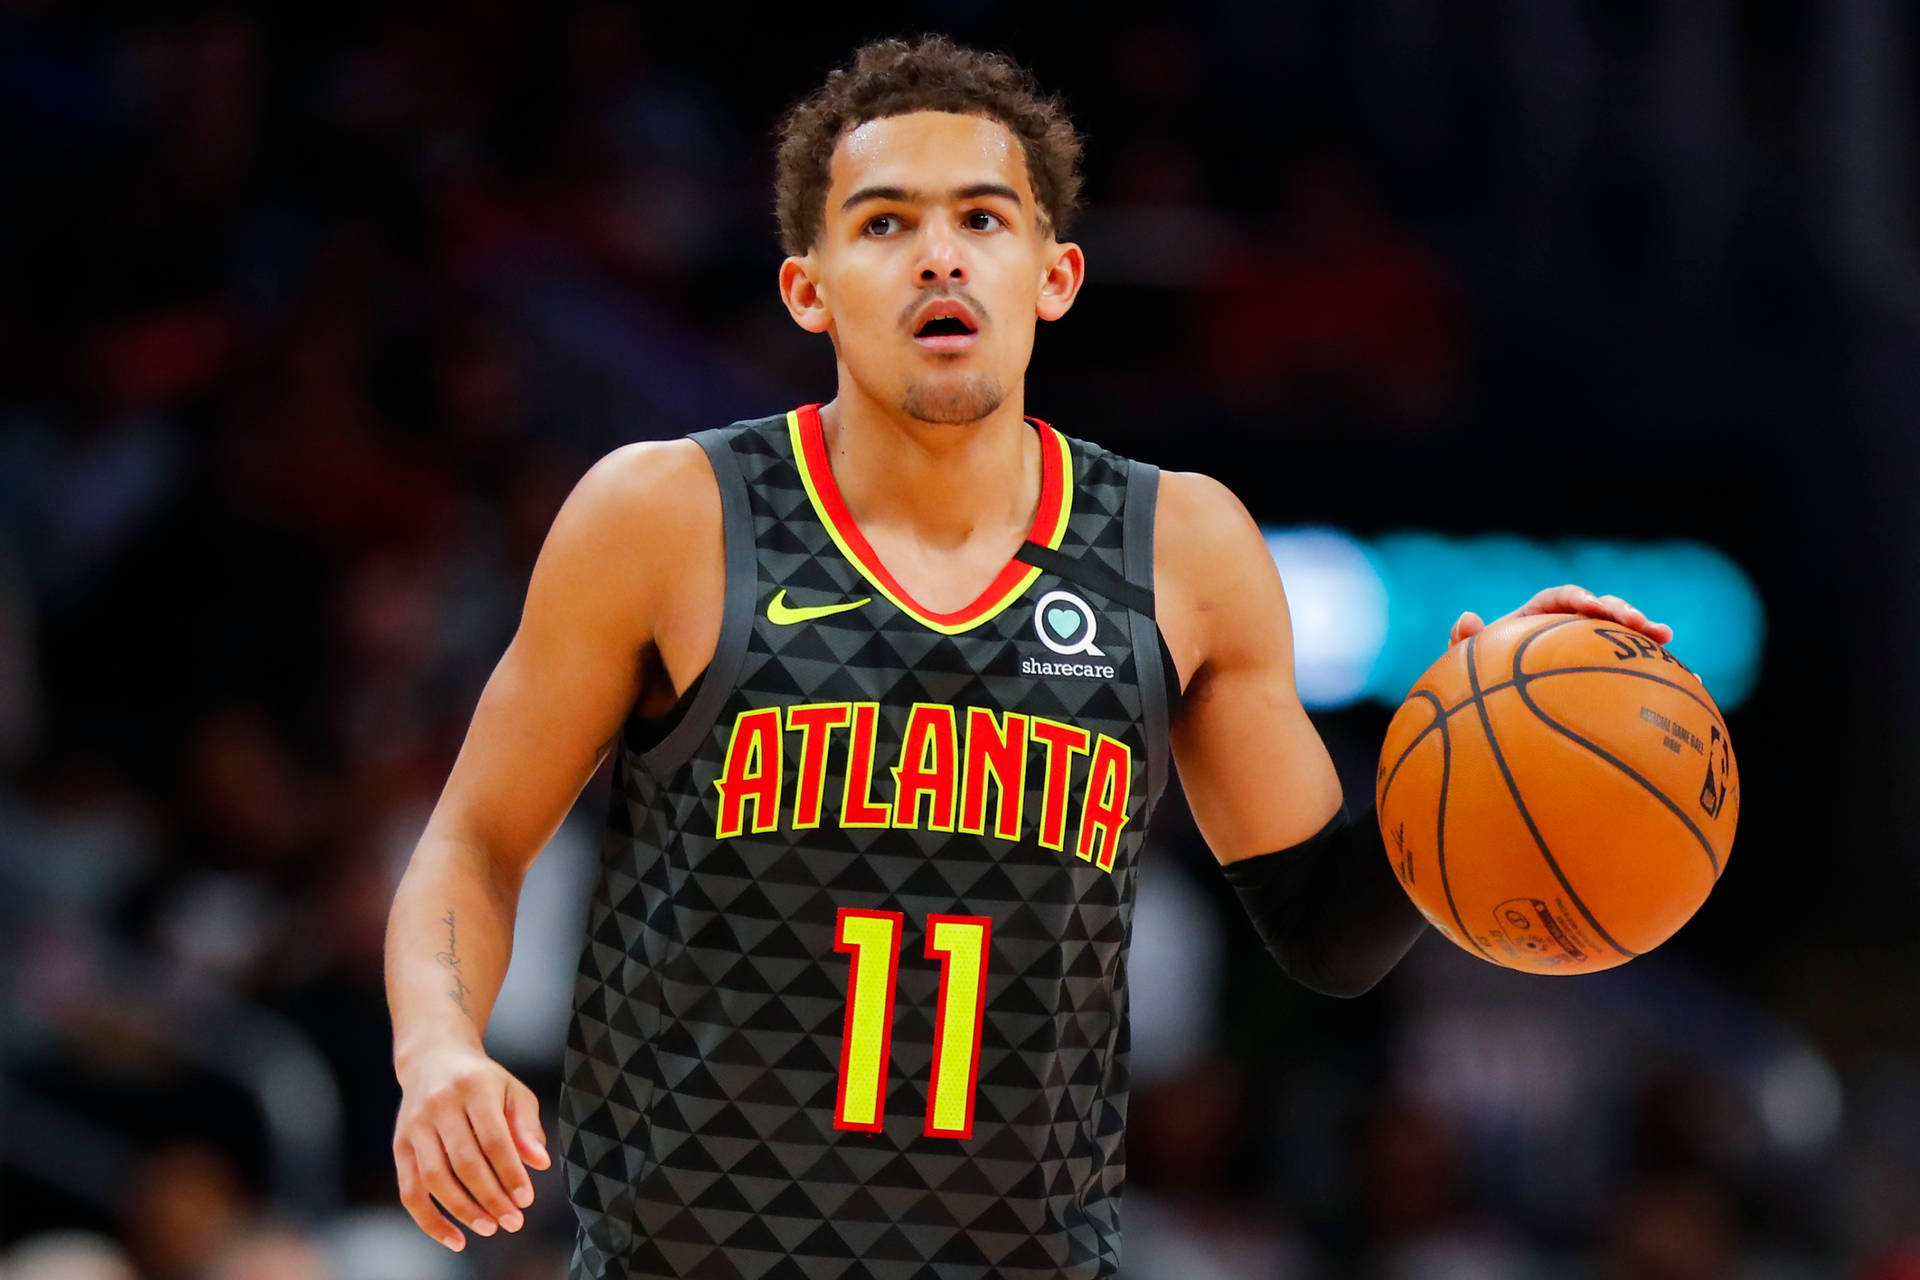 Trae Young to Represent the Atlanta Hawks in 2K Tournament